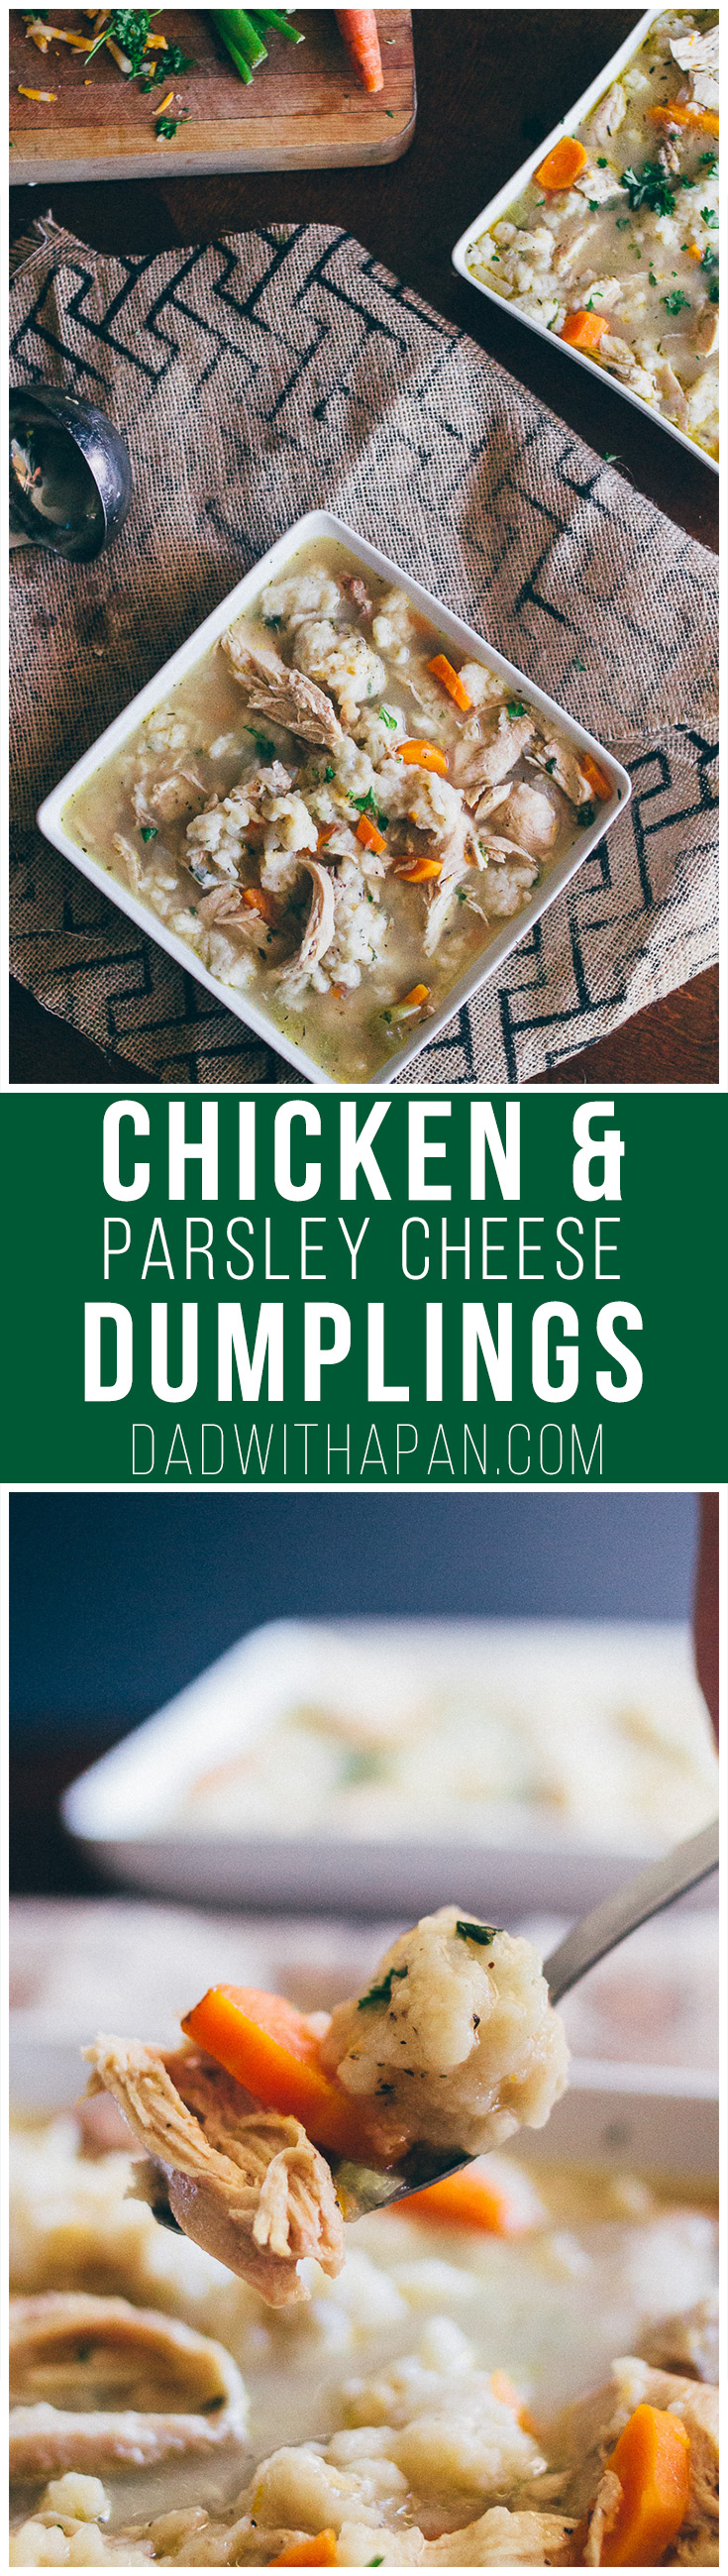 Chicken And Parsley Cheese Dumplings